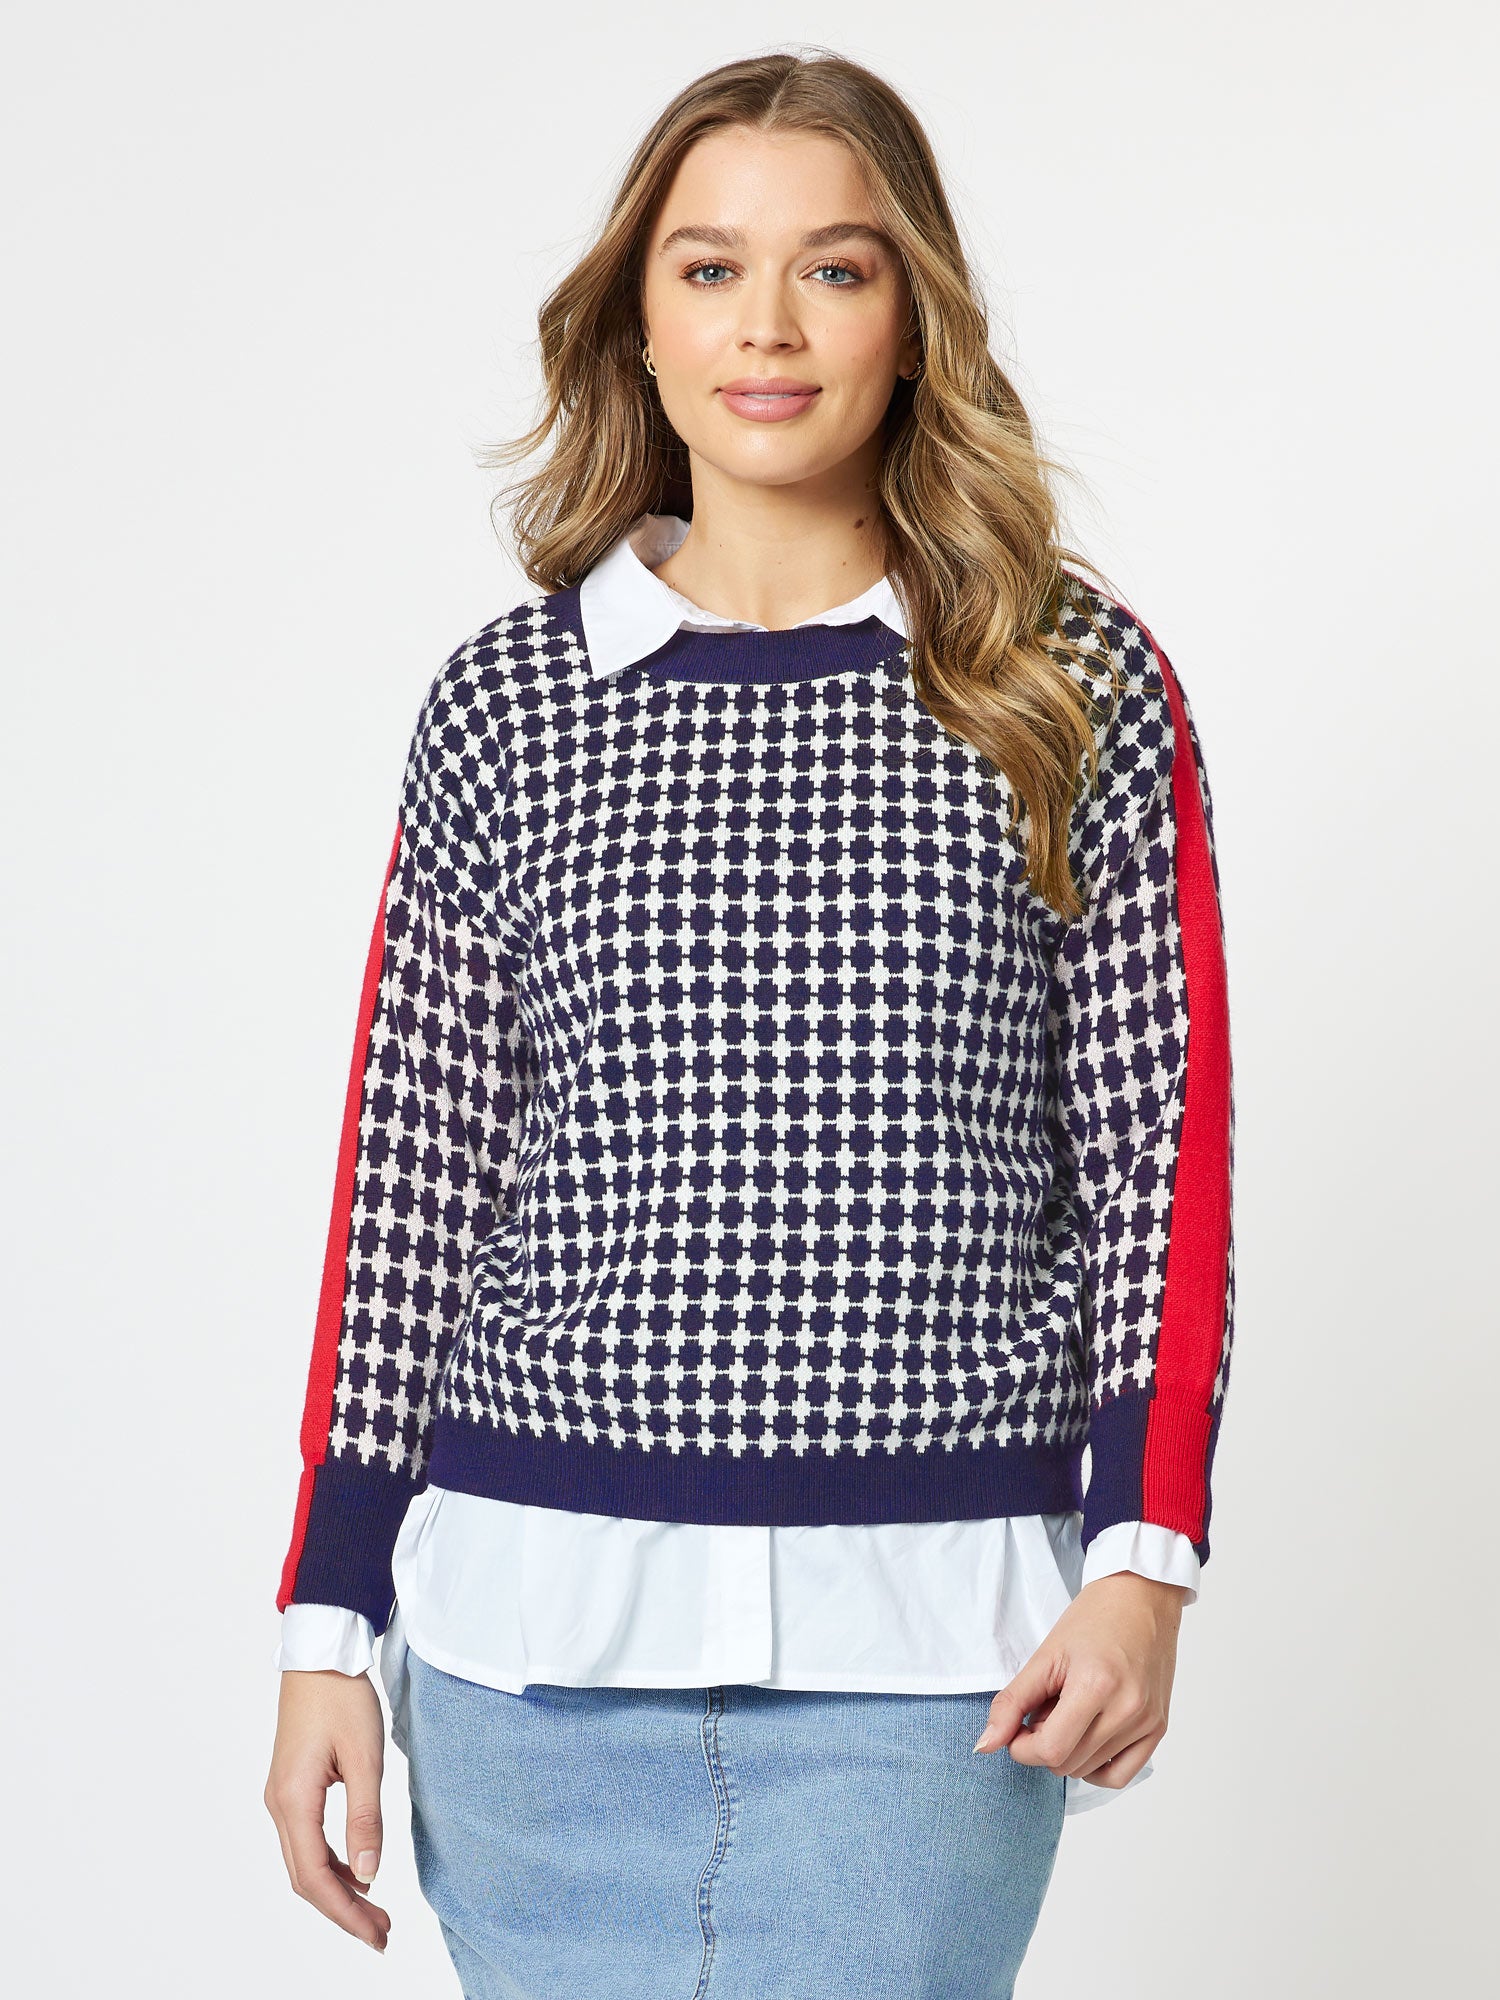 Hope Contrast Knit Top Top - Navy/Red